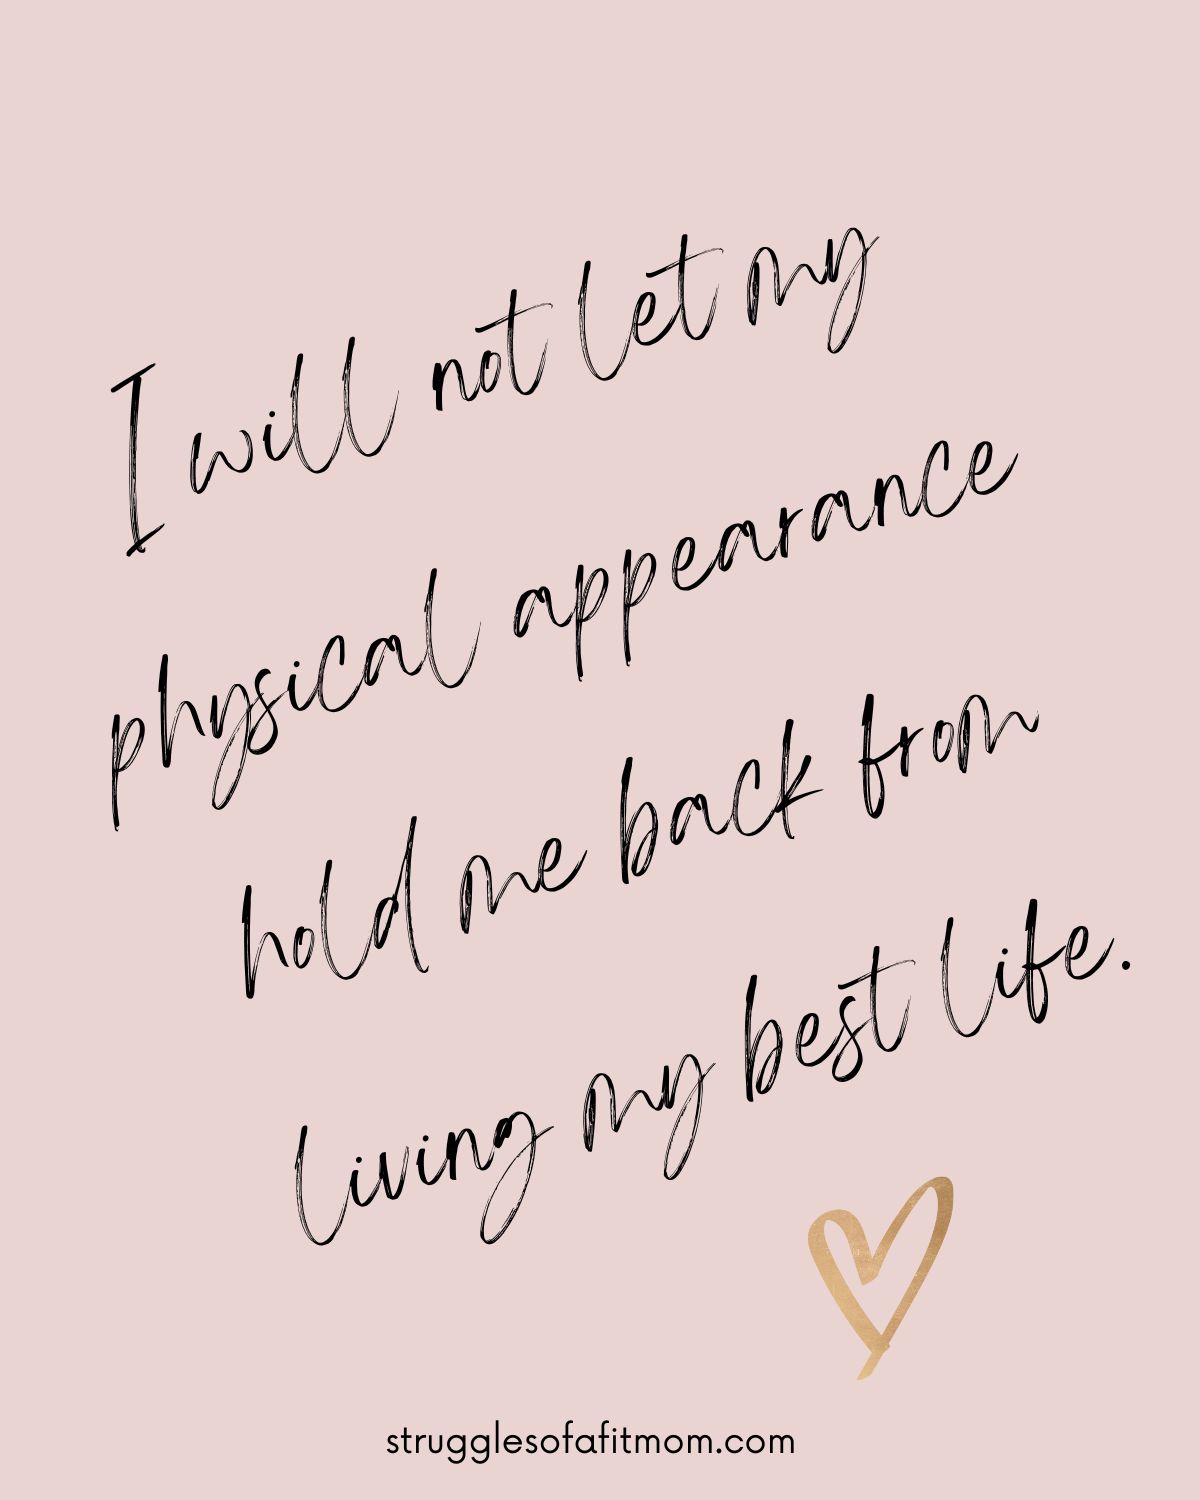 body positivity affirmation. I will not let my physical appearance hold me back from living my best life